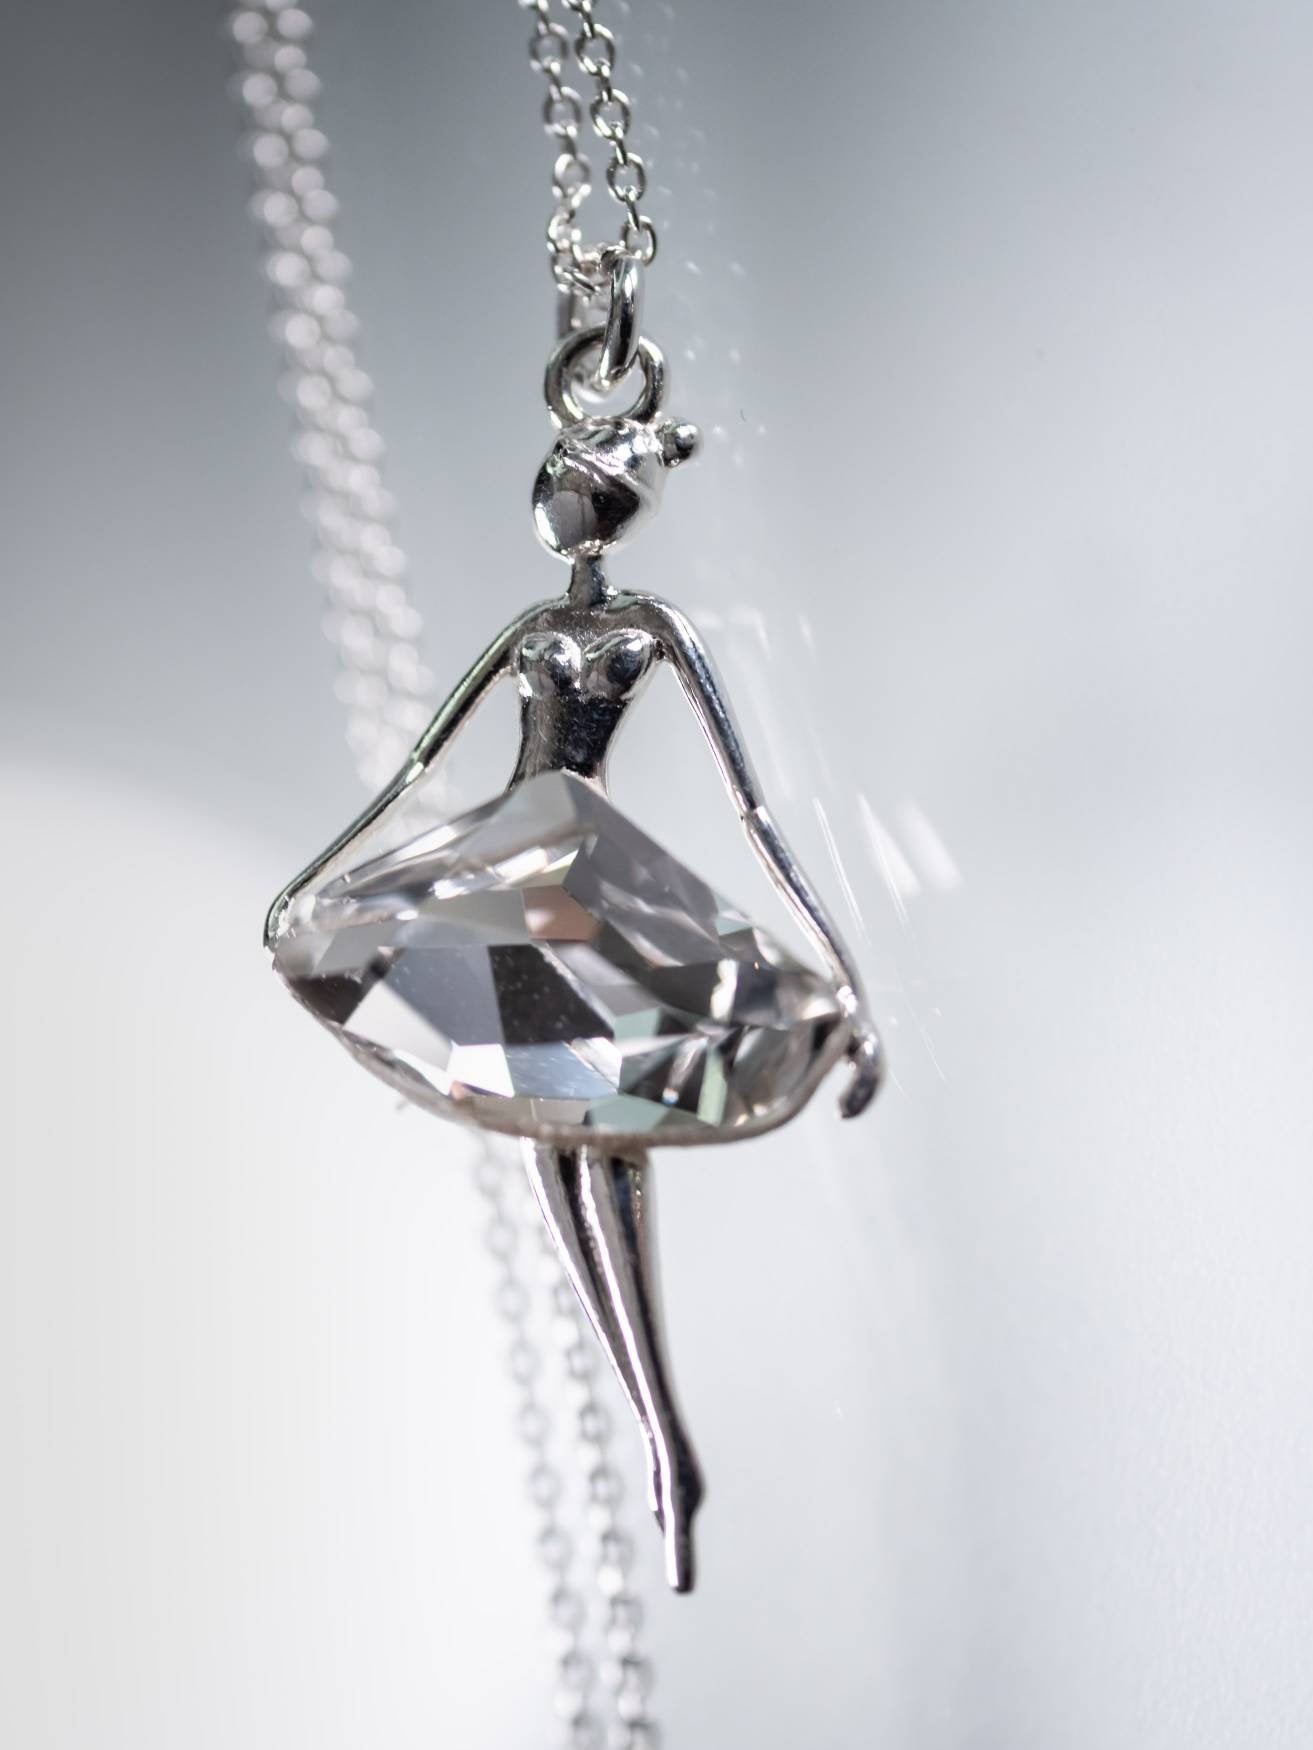 Handcrafted in Ireland by Magpie Gems, this exquisite sterling silver pendant necklace glistens with a Crystal Clear dress-shaped crystal charm. Dangling from a delicate 925 silver chain, this piece is a testament to feminine grace, designed to celebrate and empower women and girls with its ethereal beauty.